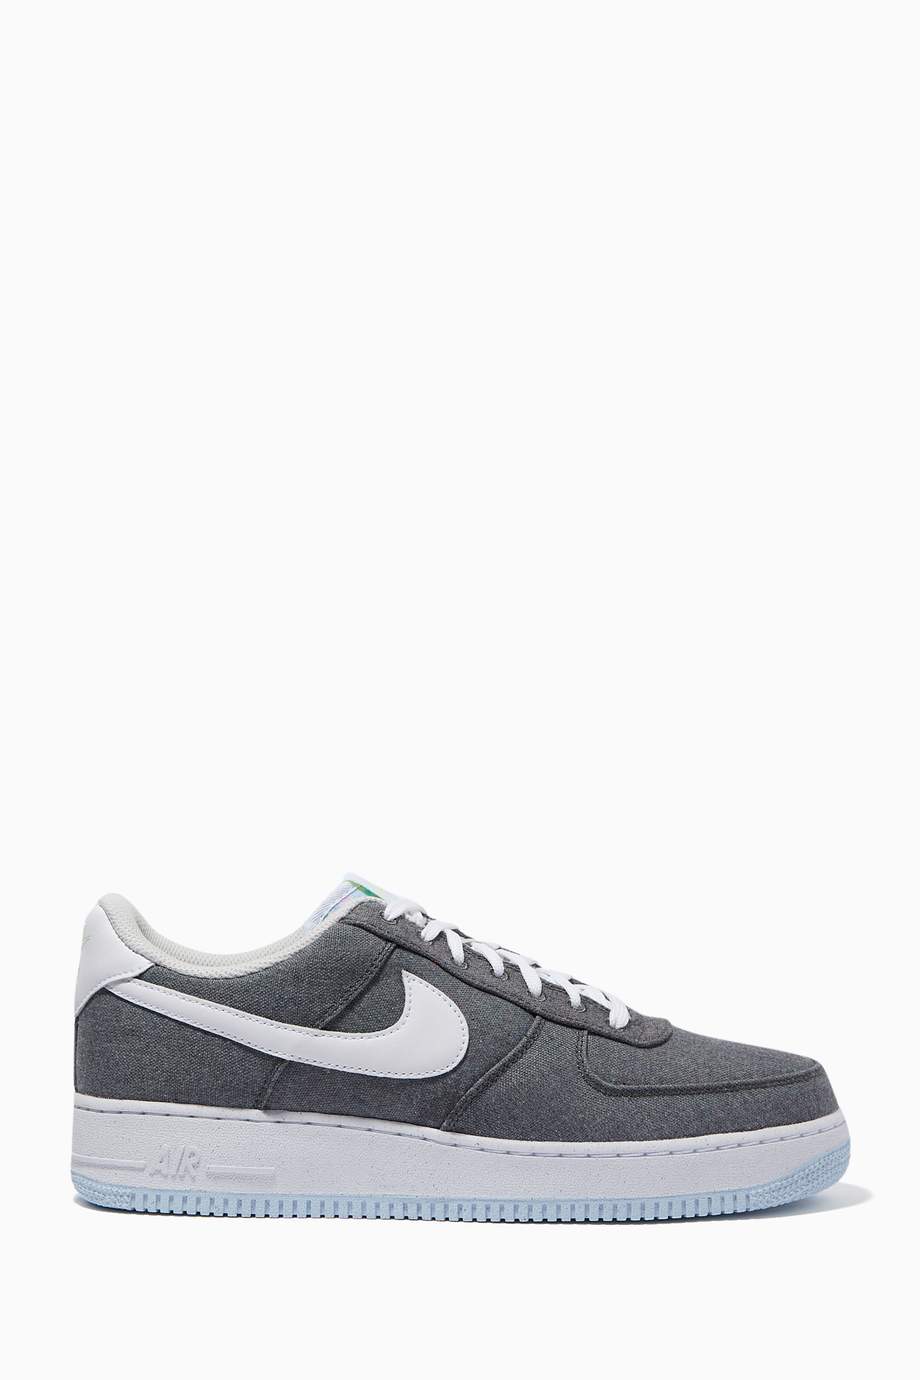 Shop Nike Grey Air Force 1 Sneakers in Recycled Canvas for Men | Ounass UAE